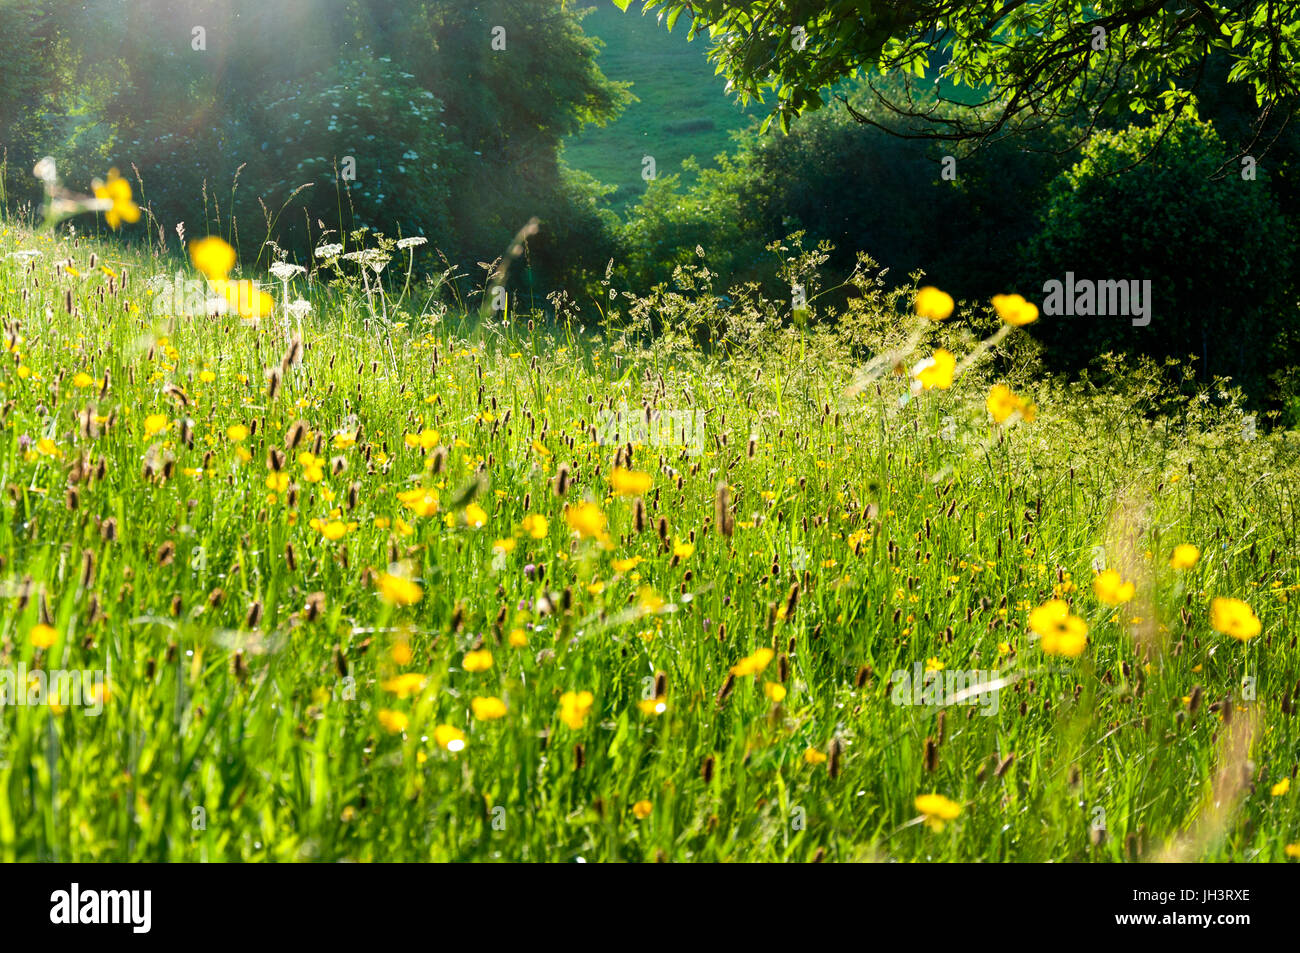 English countryside rural meadow with wild flowers in summer evening sunshine light Stock Photo